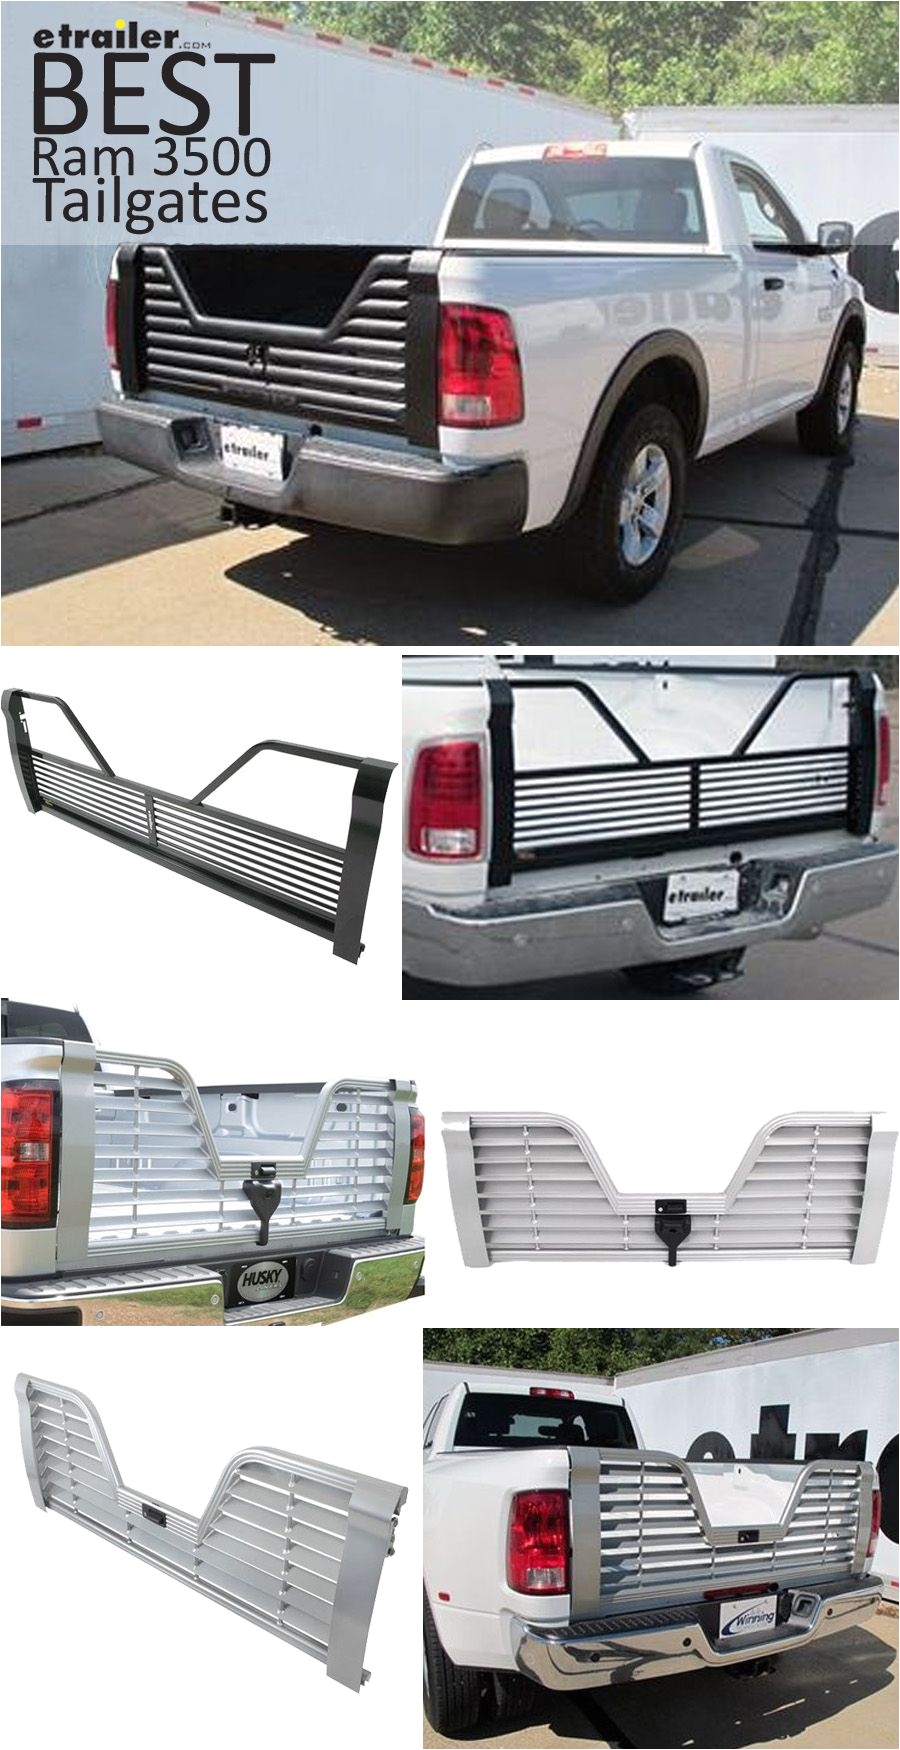 Best Removable Truck Rack Here are the Best Tailgates and Tailgate Accessories for Your Dodge